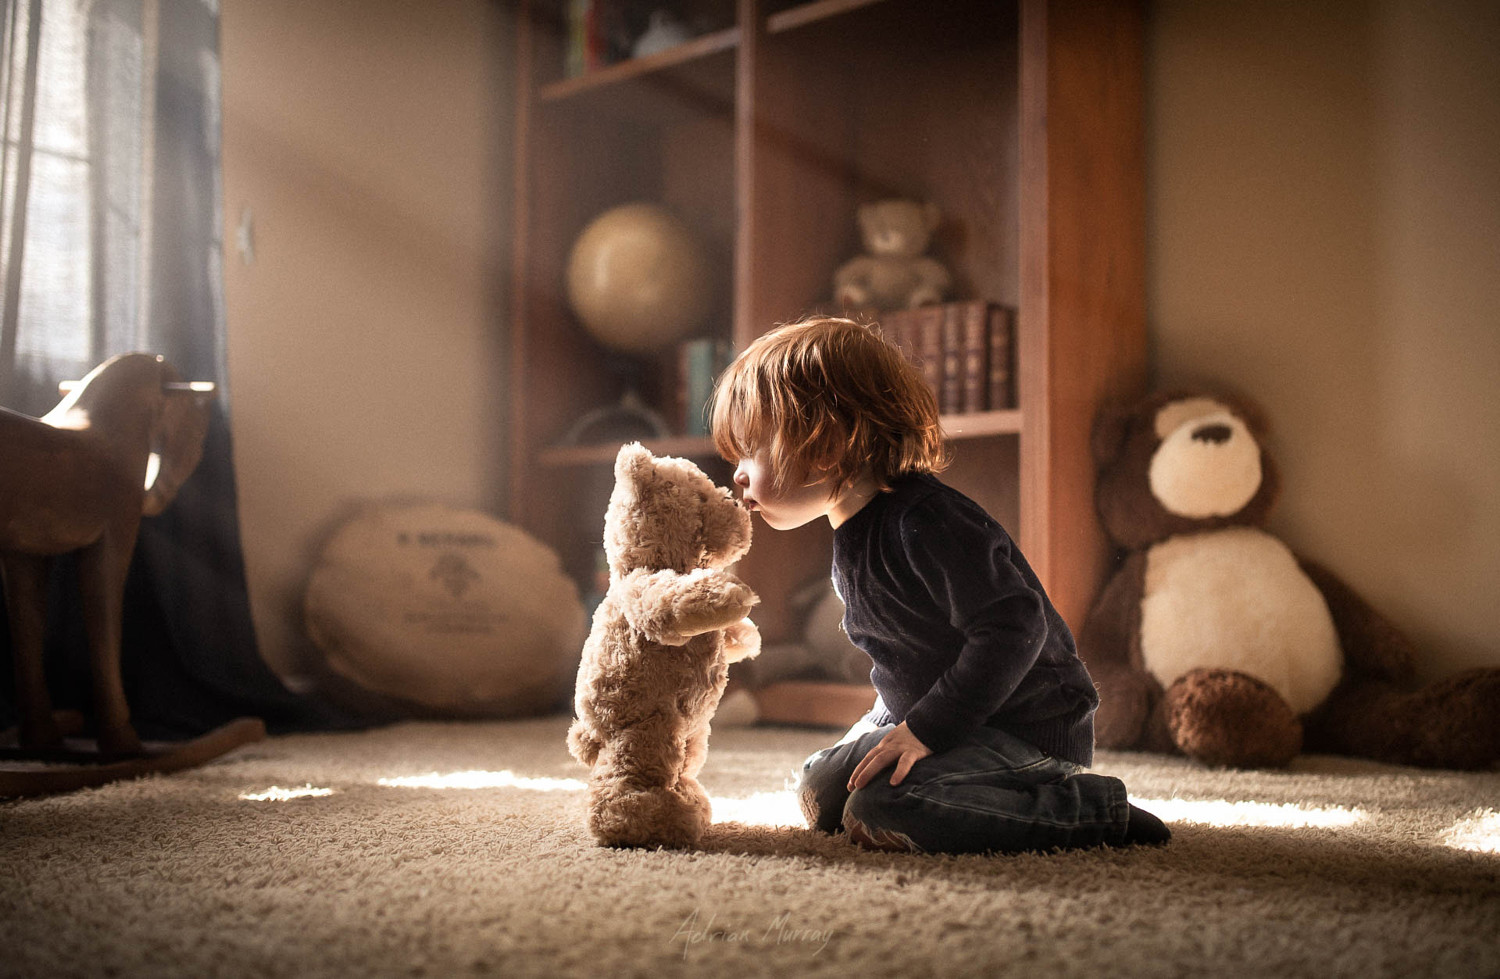 Top 20 Family Photos on 500px So Far This Year